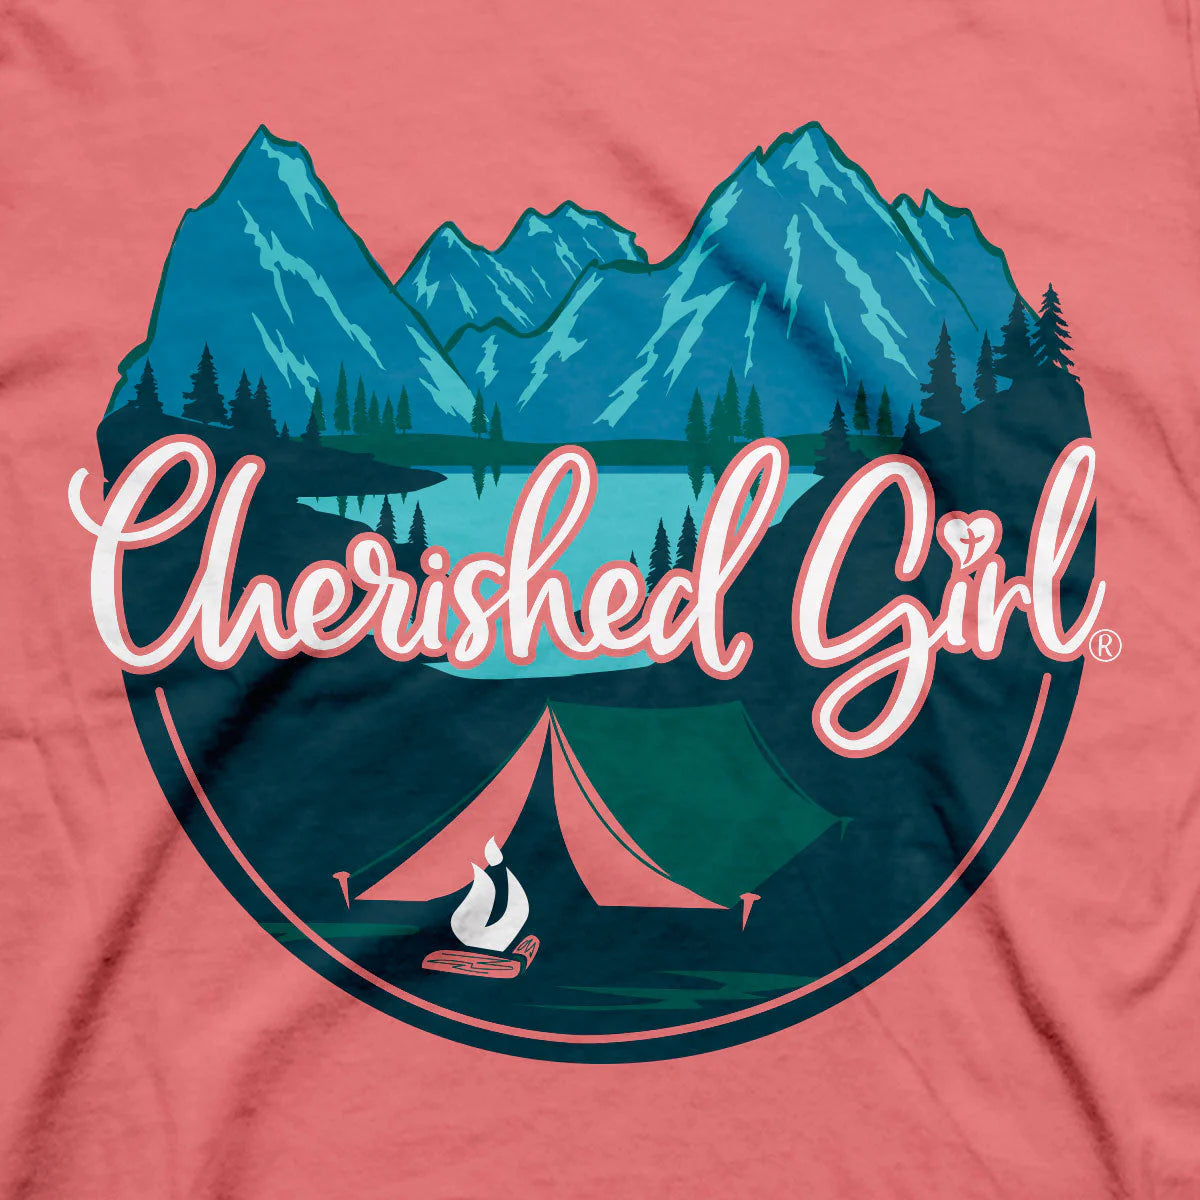 Cherished Girl Womens T-Shirt It Is Well Oval Cherished Girl® Apparel Short Sleeve T-shirts Women's